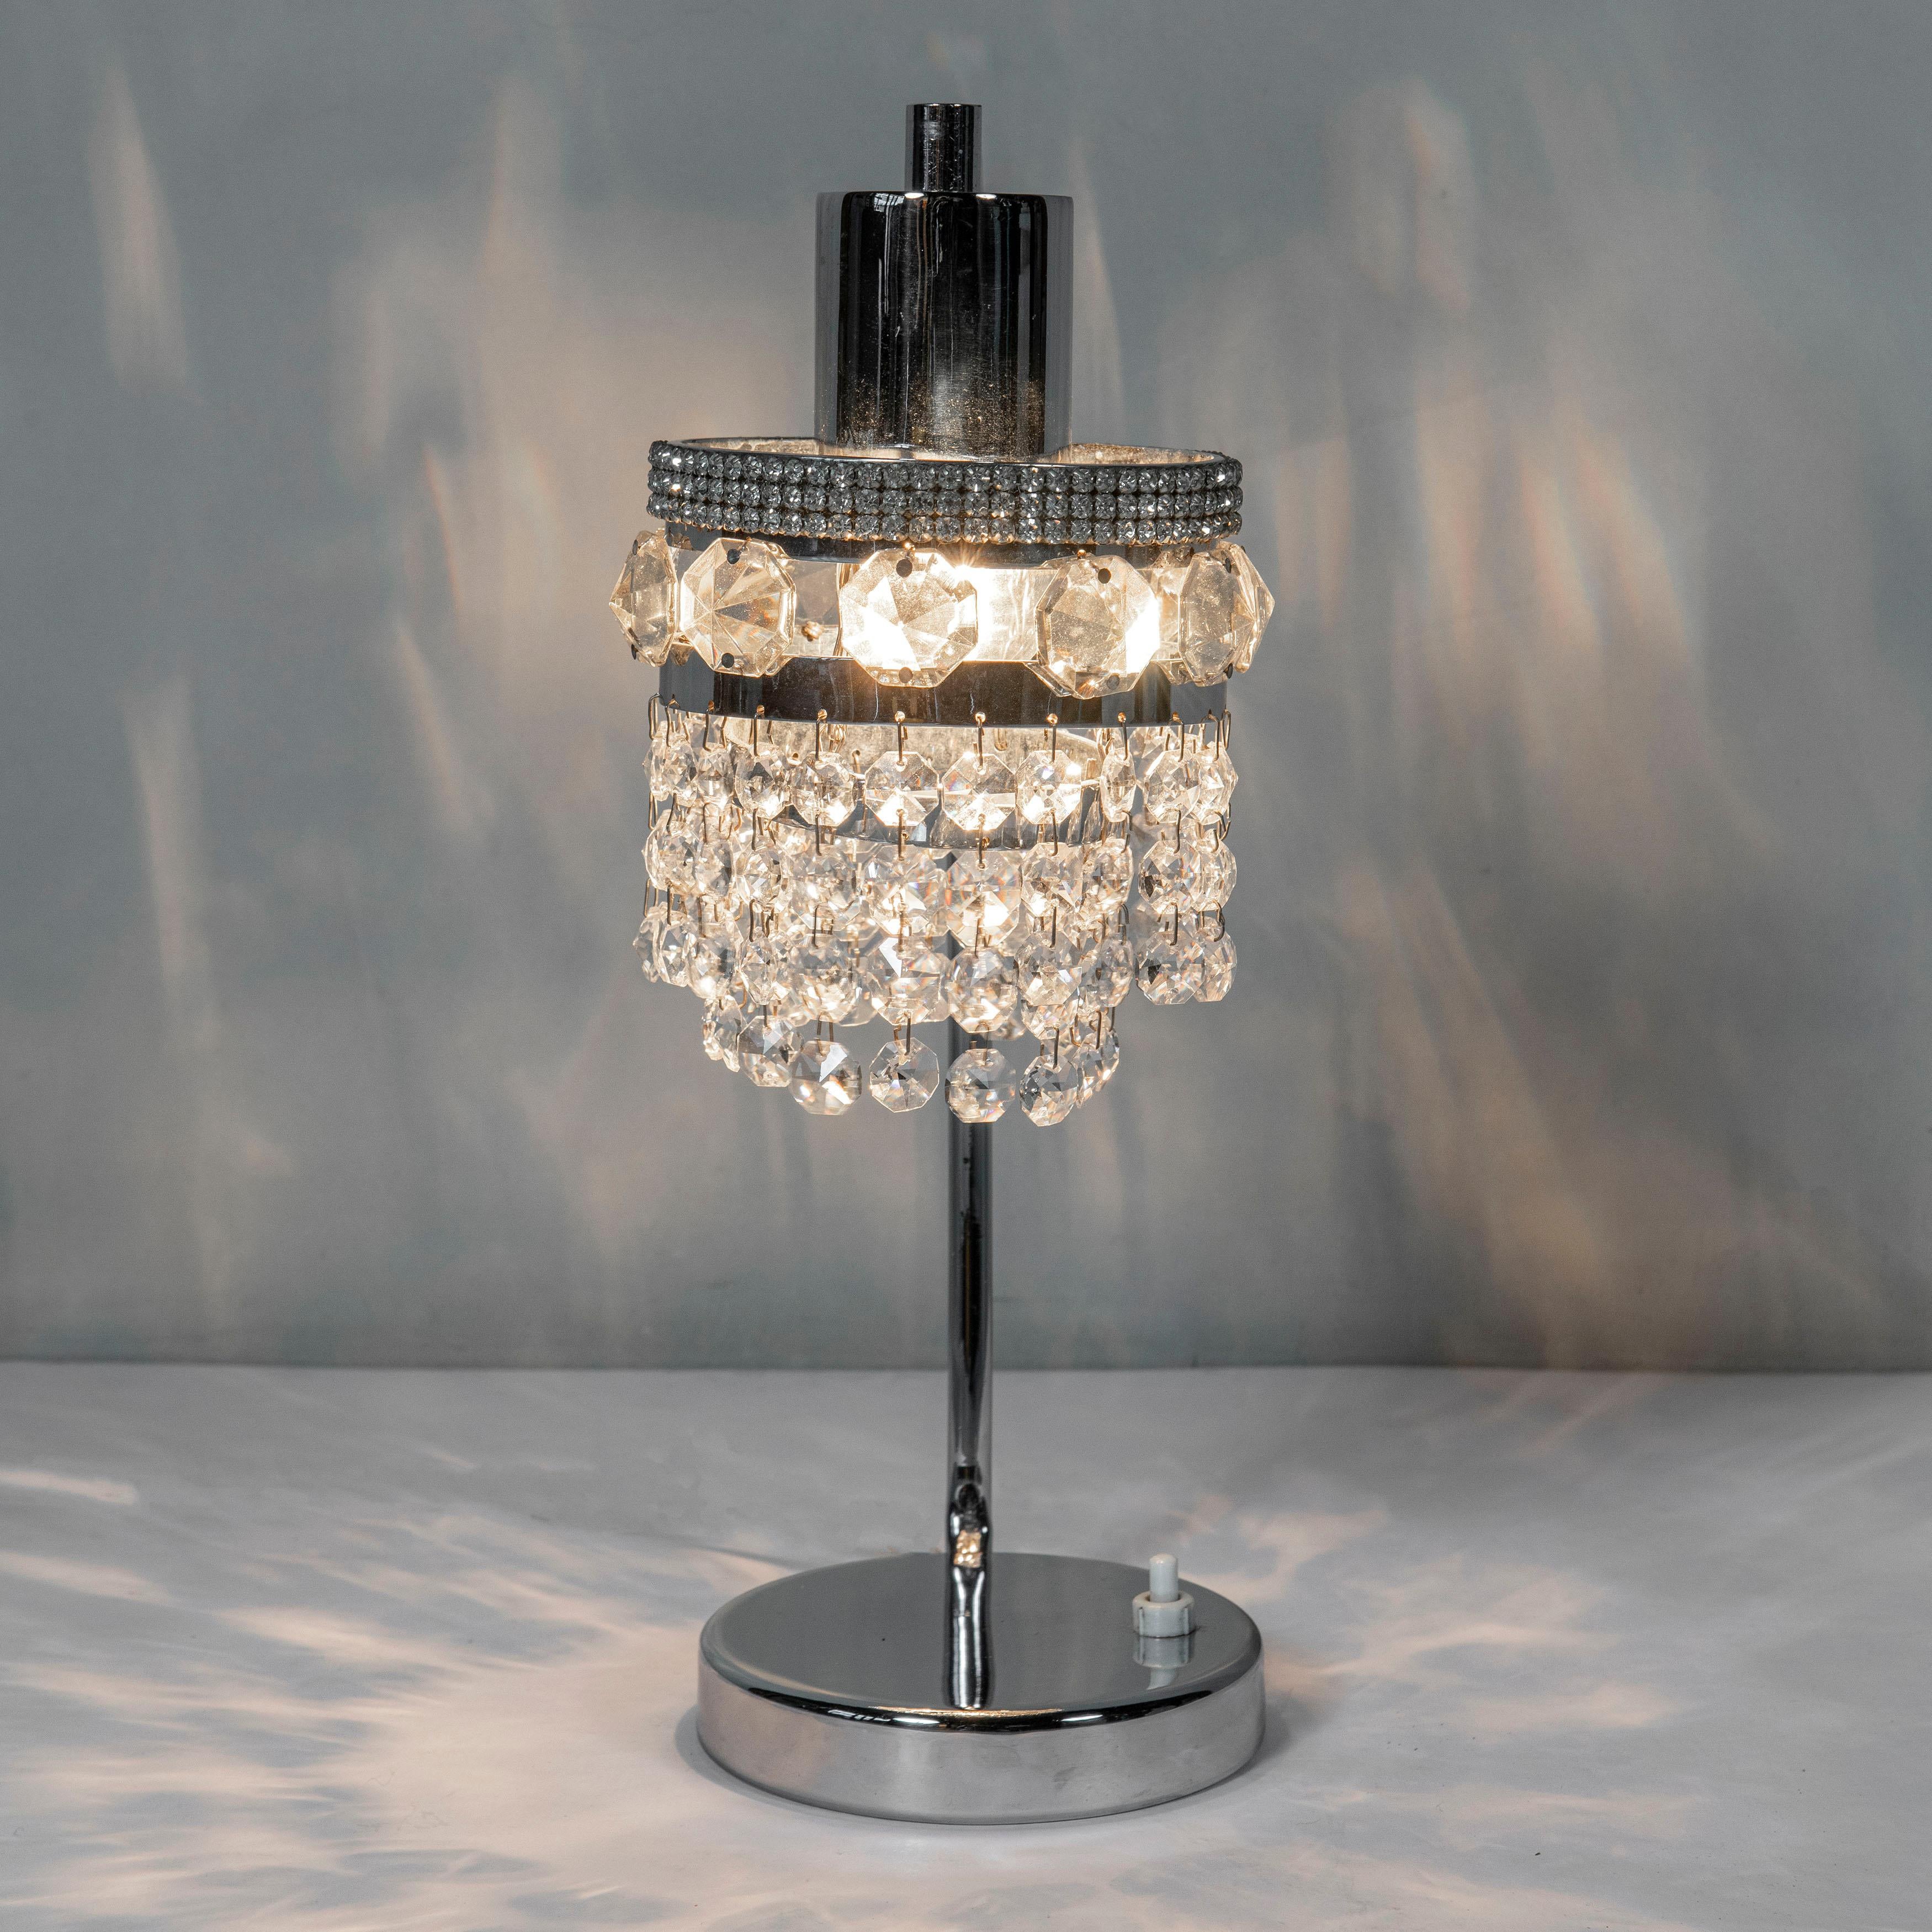 Chrome metal and crystal glass table lamp. Austria, circa 1960.
Attributed to Bakalowits & Söhne.